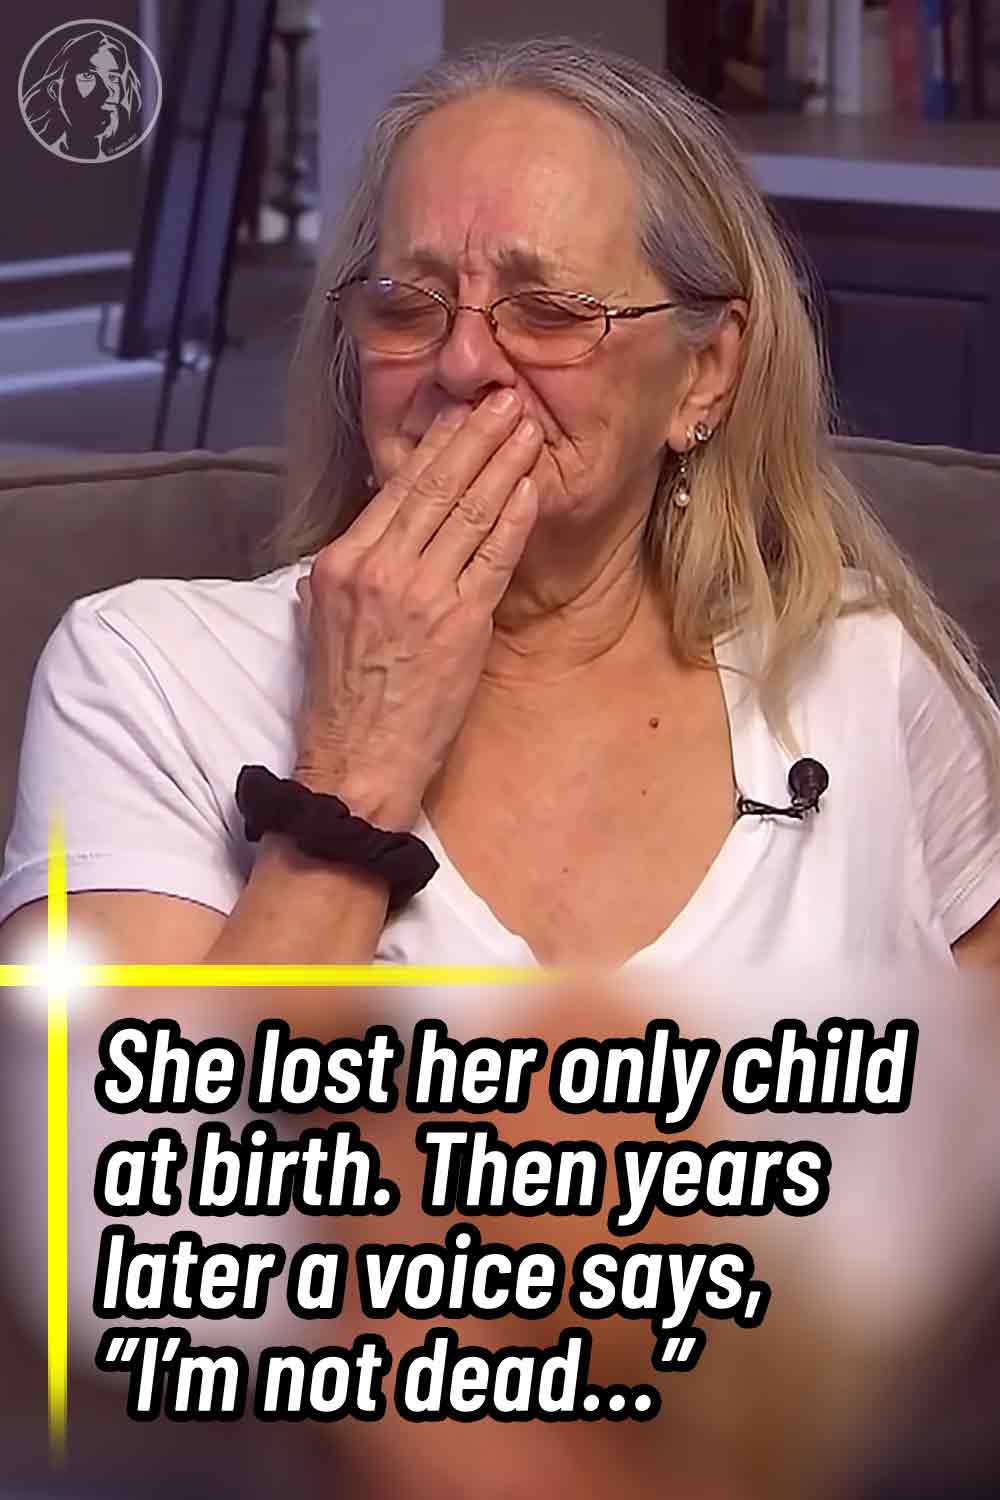 She lost her only child at birth. Then years later a voice says, ”I’m not dead...”